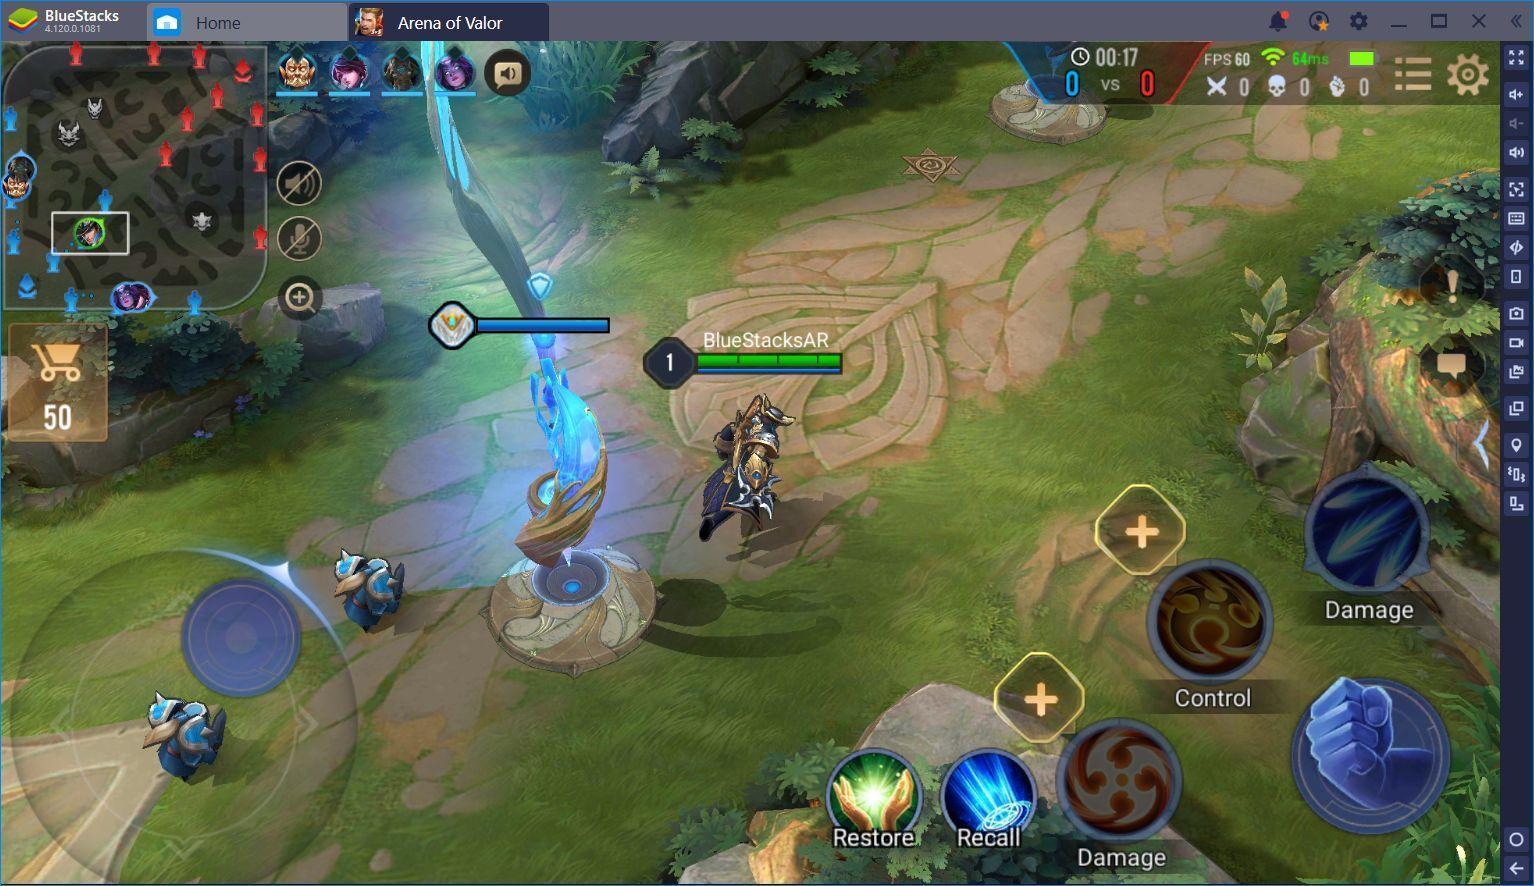 How to remove friends in Arena of Valor